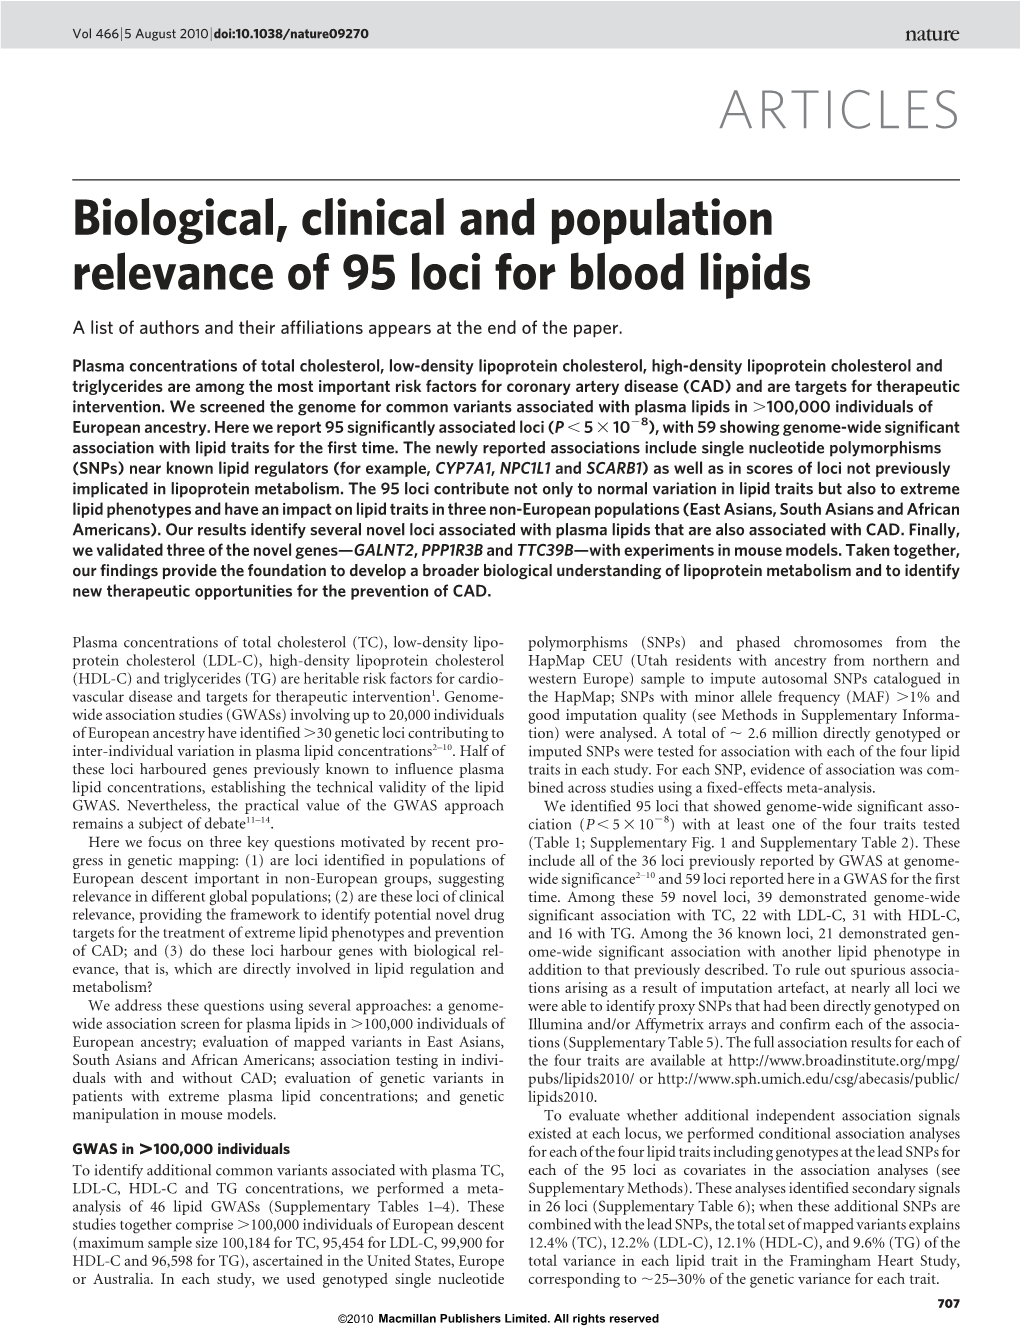 Biological, Clinical and Population Relevance of 95 Loci for Blood Lipids